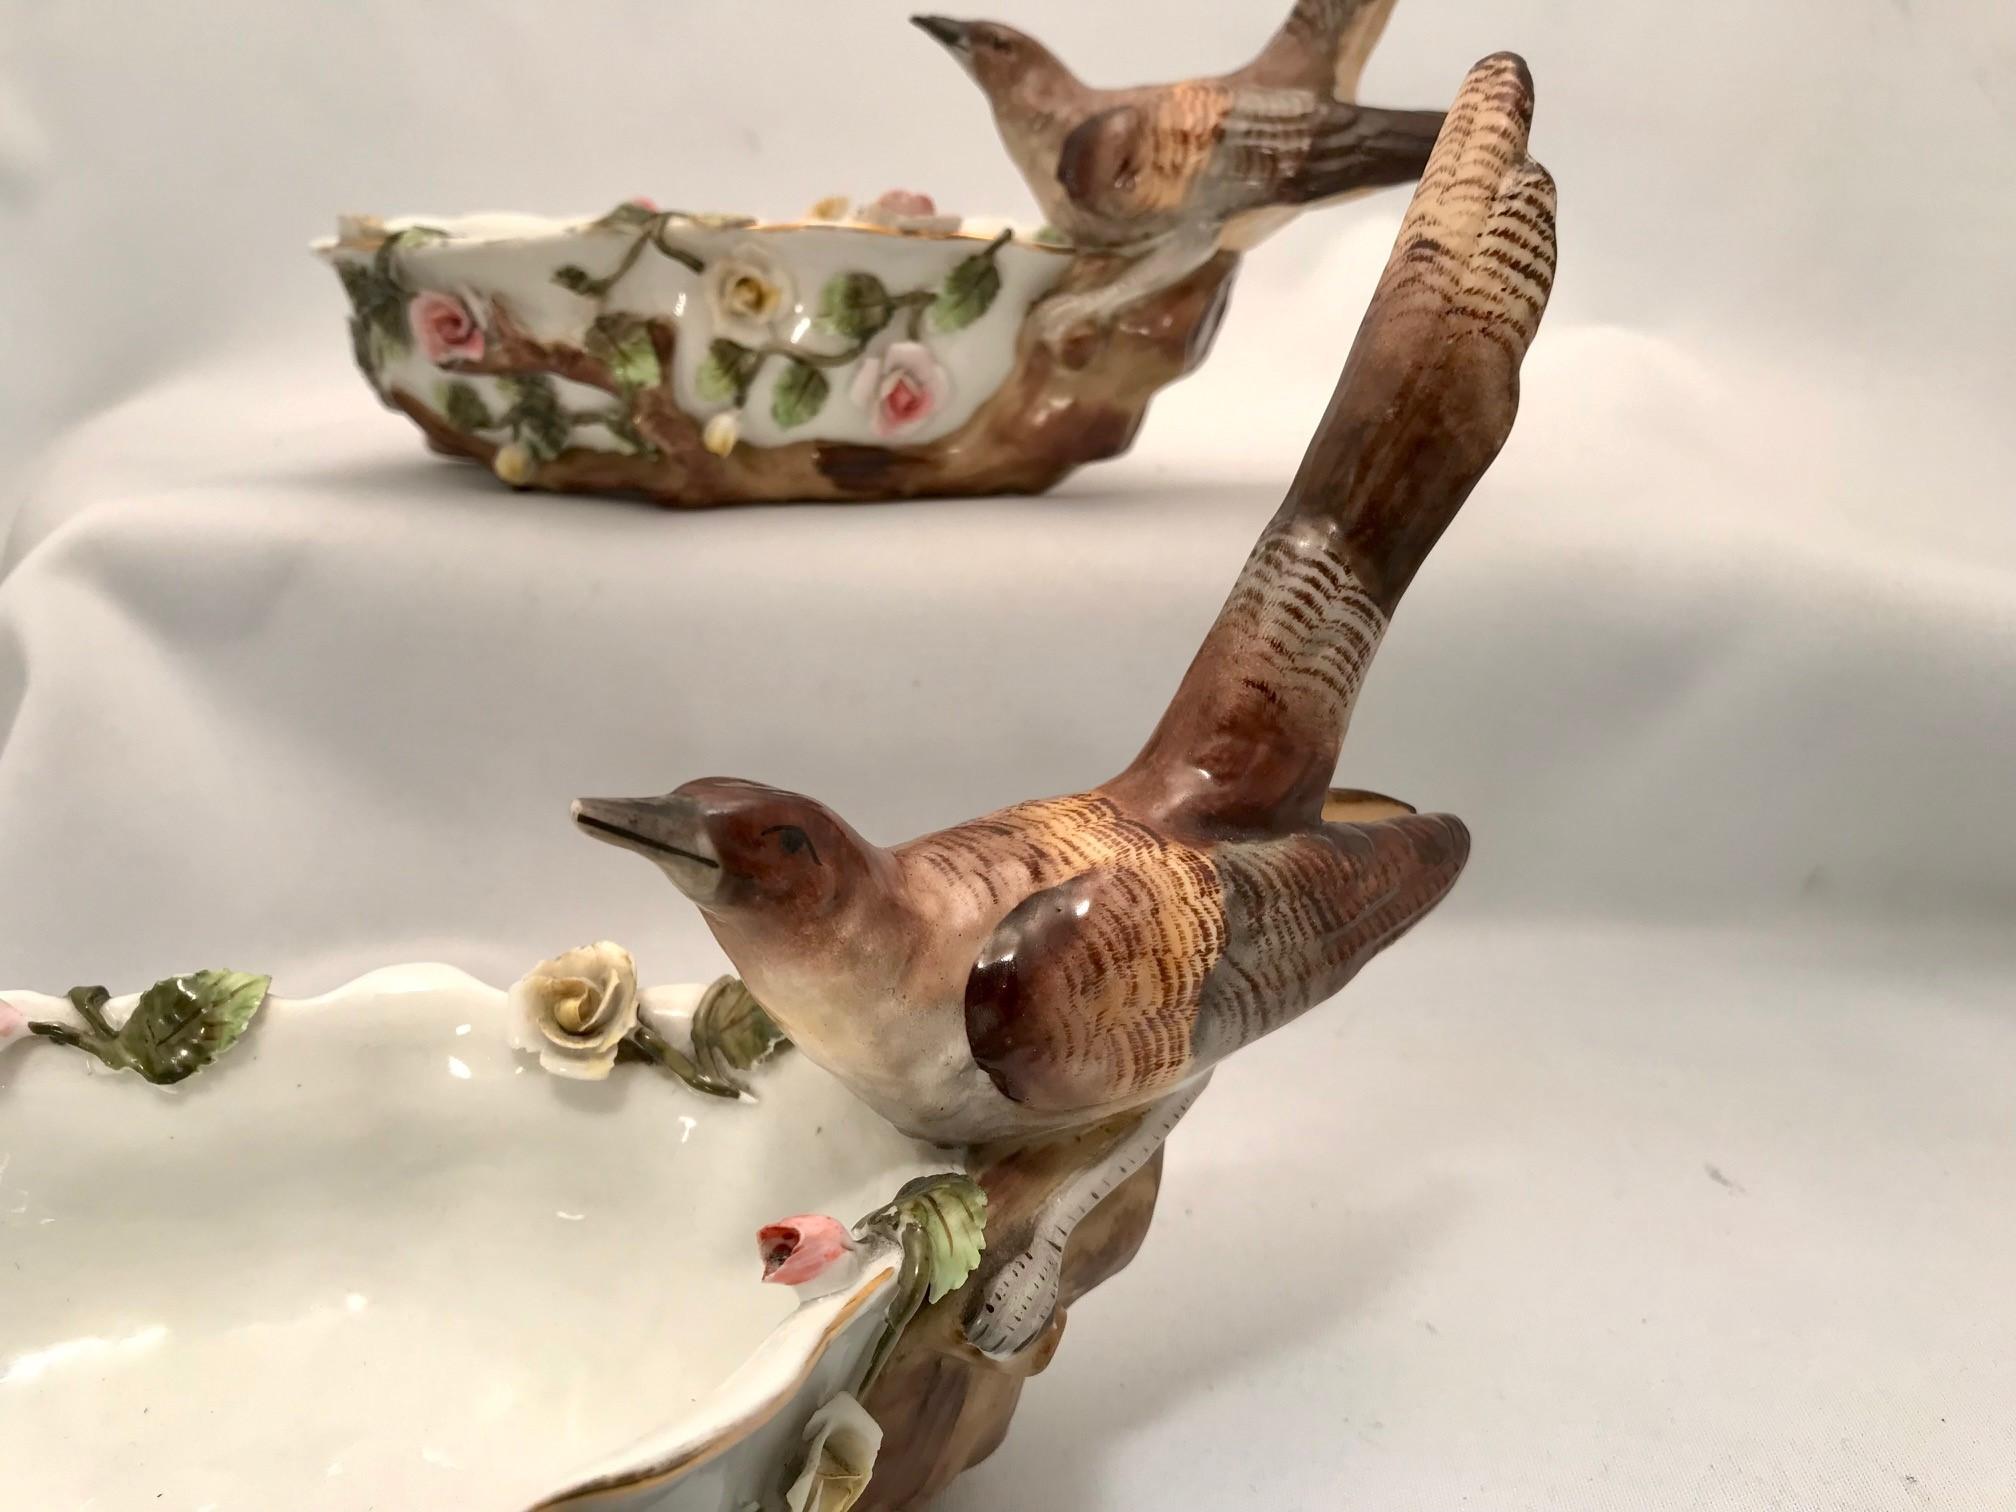 These are porcelain and were made late in the 19th century, probably by Sitzendorf. The edges are scalloped and gilt, the body is applied with rambling roses. The bird is perhaps a thrush.